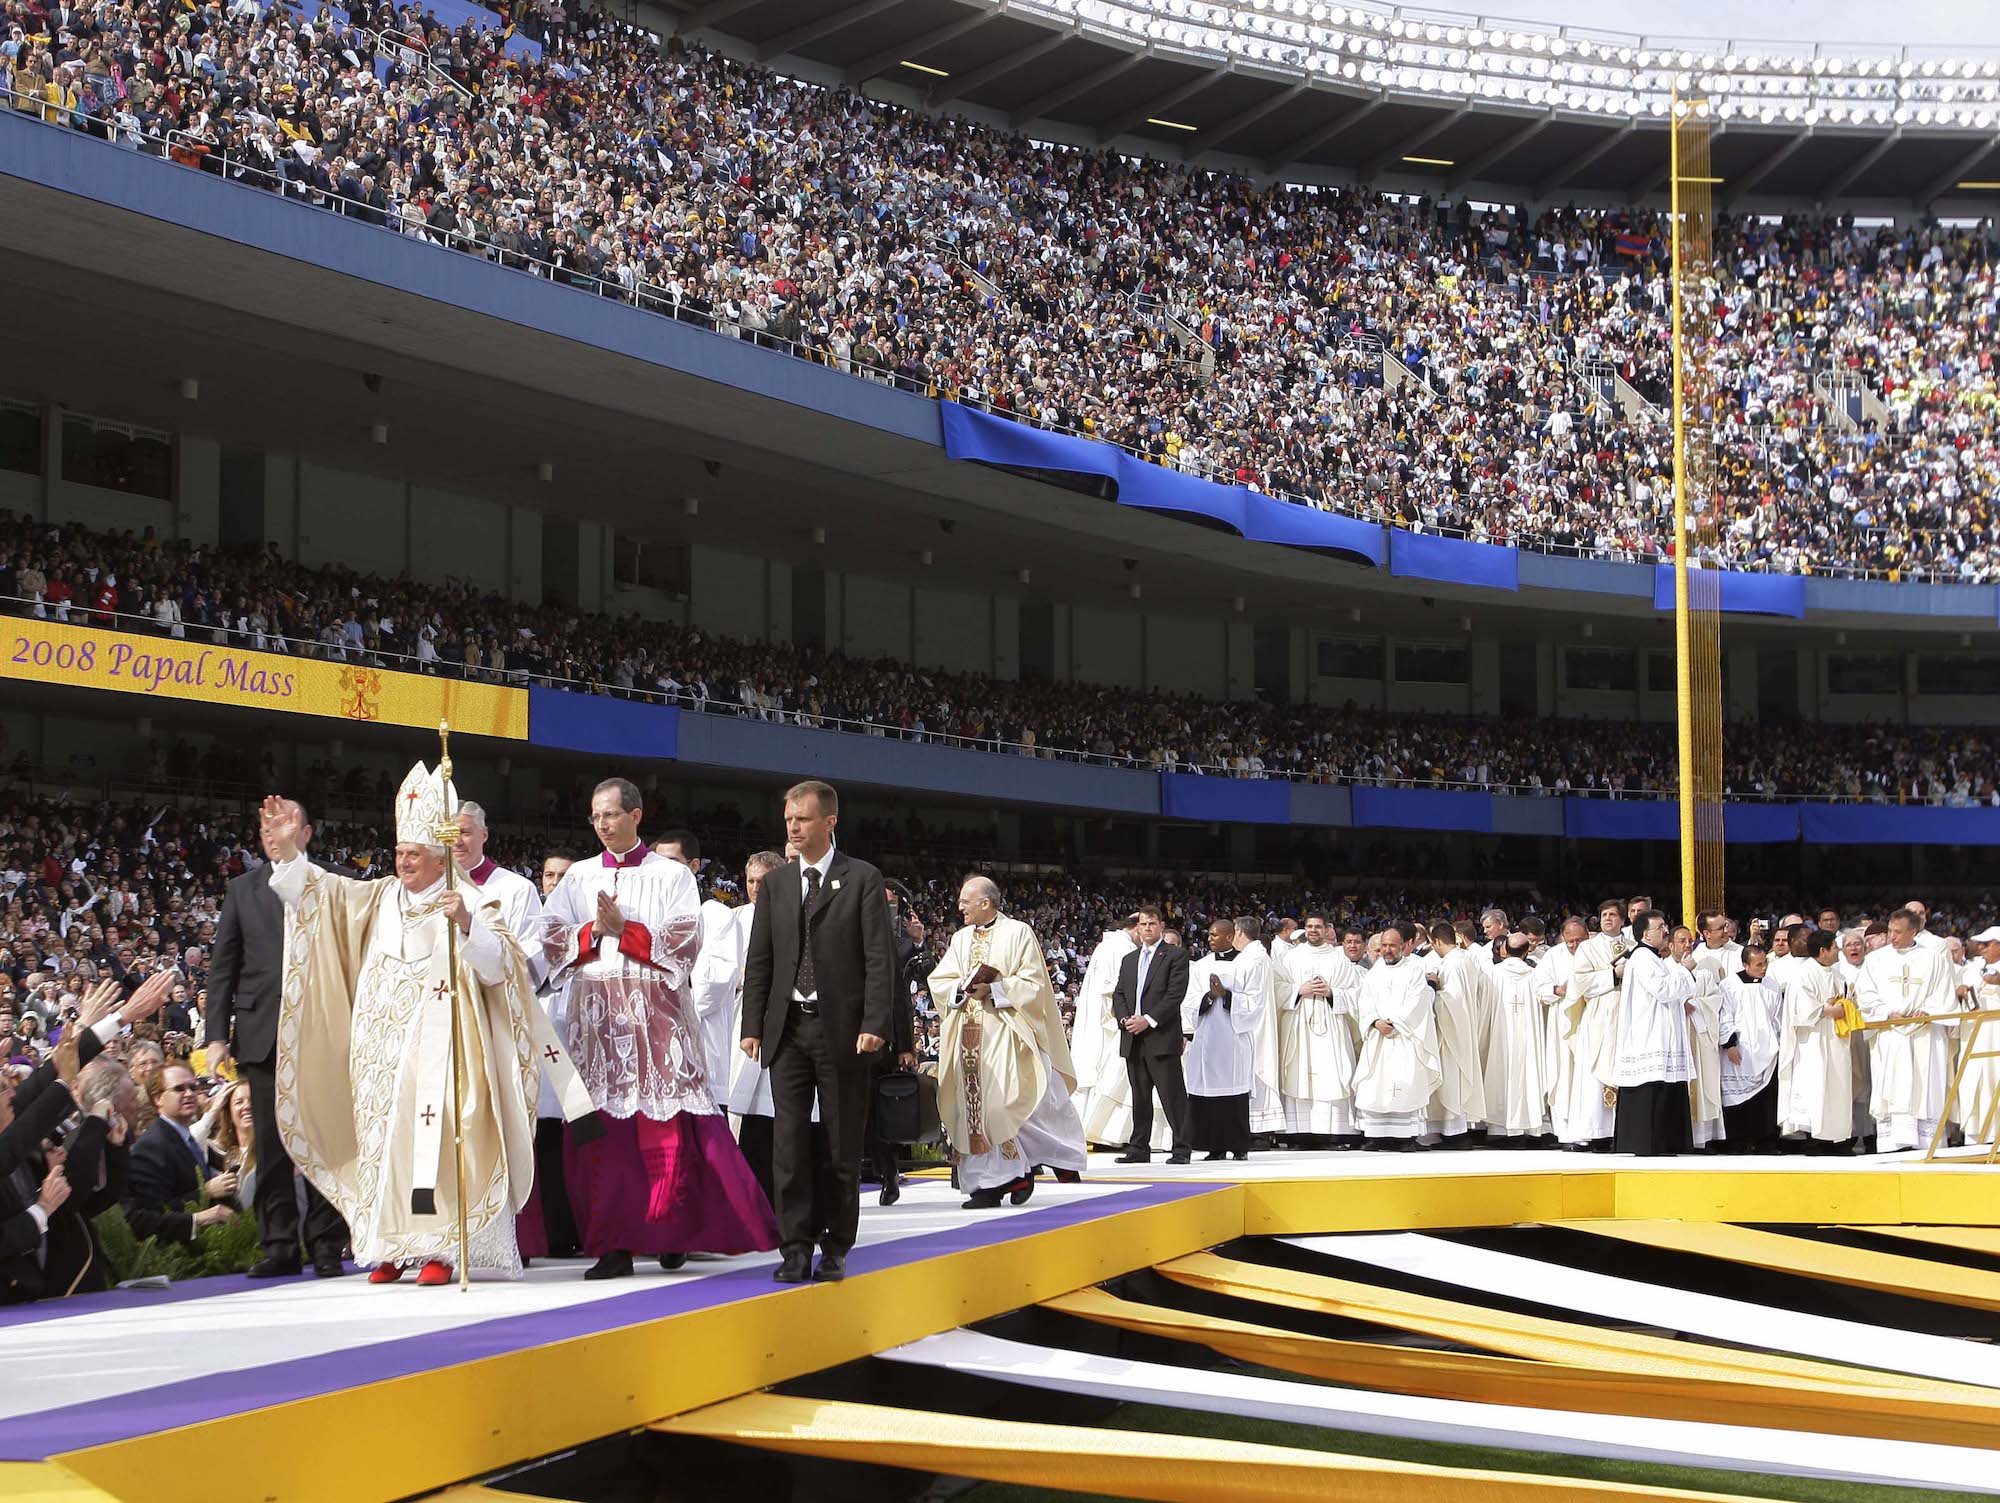 Benedict arrives to celebrate Mass at New York's Yankee Stadium in April 2008. During his trip to the United States, he also visited the White House and spoke to the United Nations General Assembly.